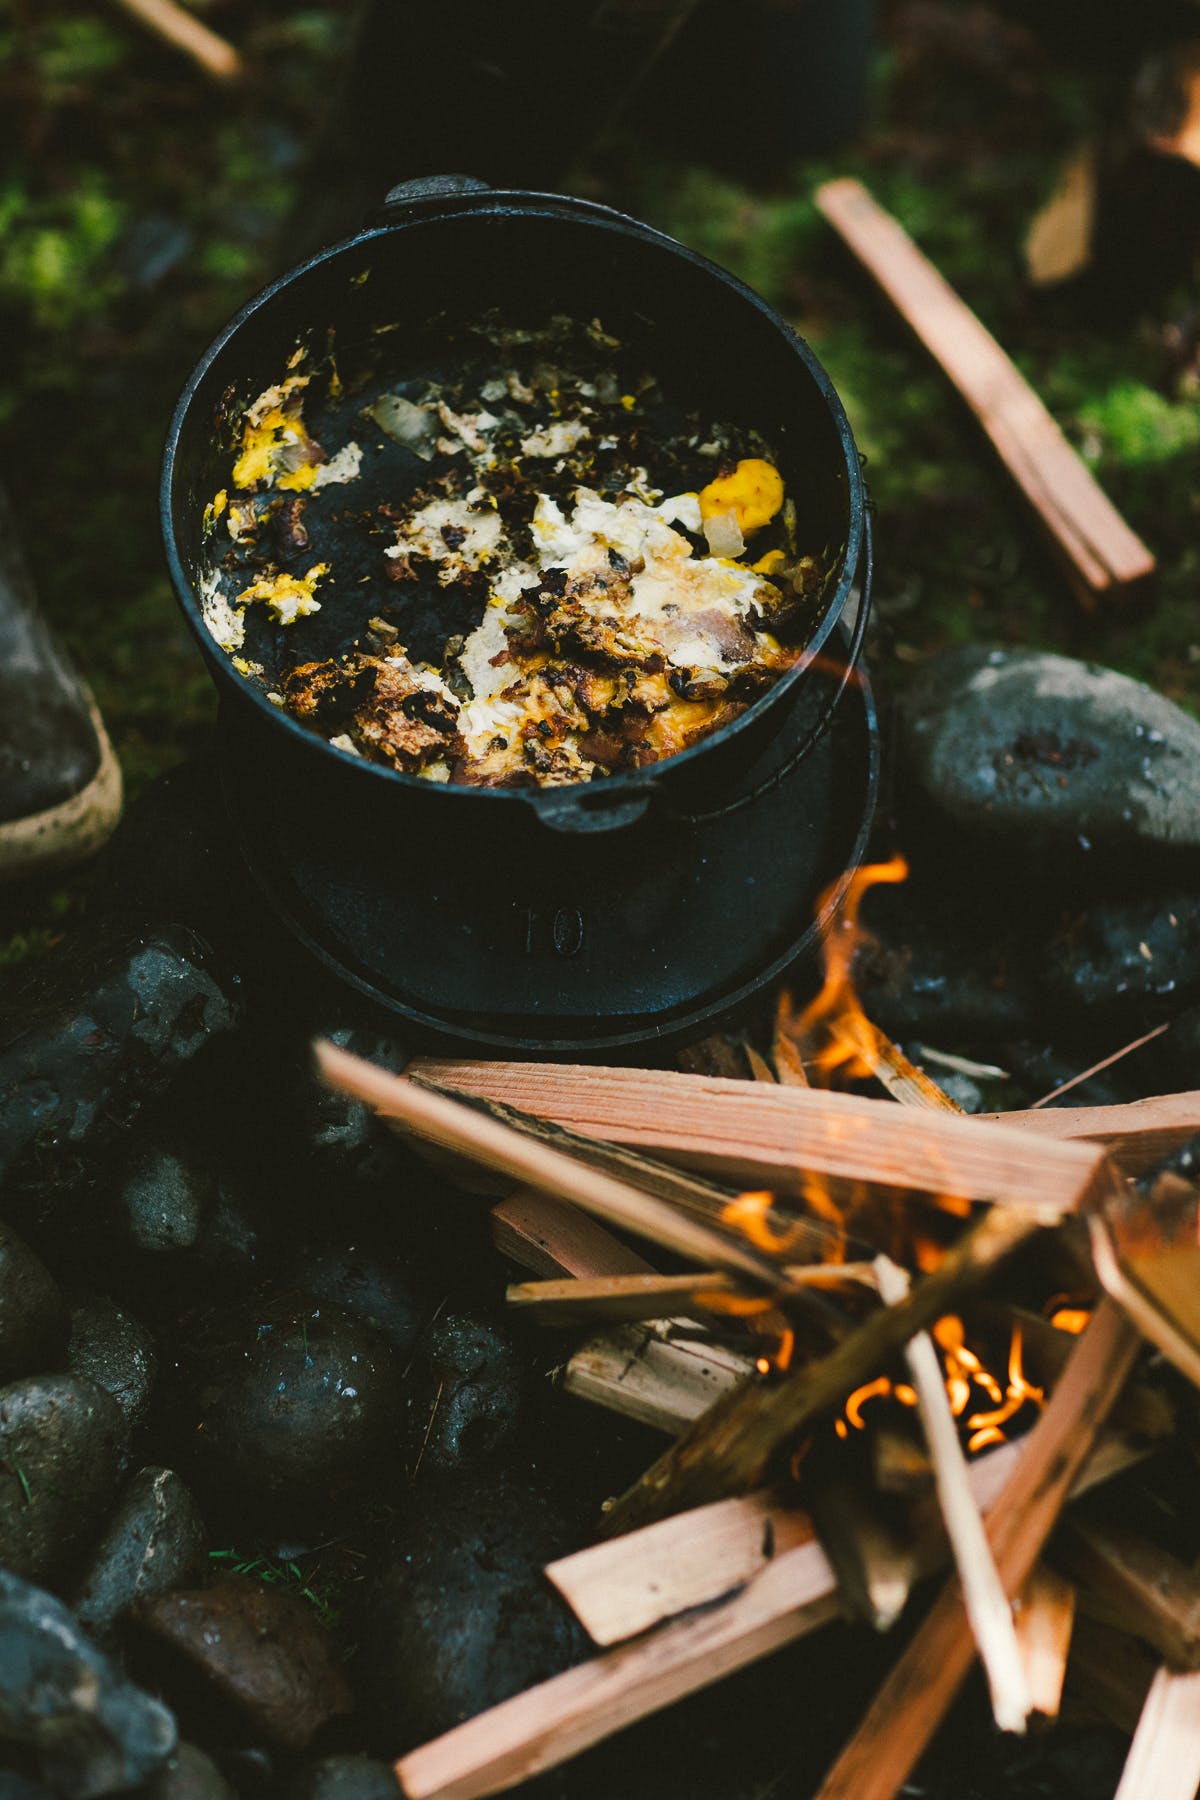 Filson Life - Campfire Cooking